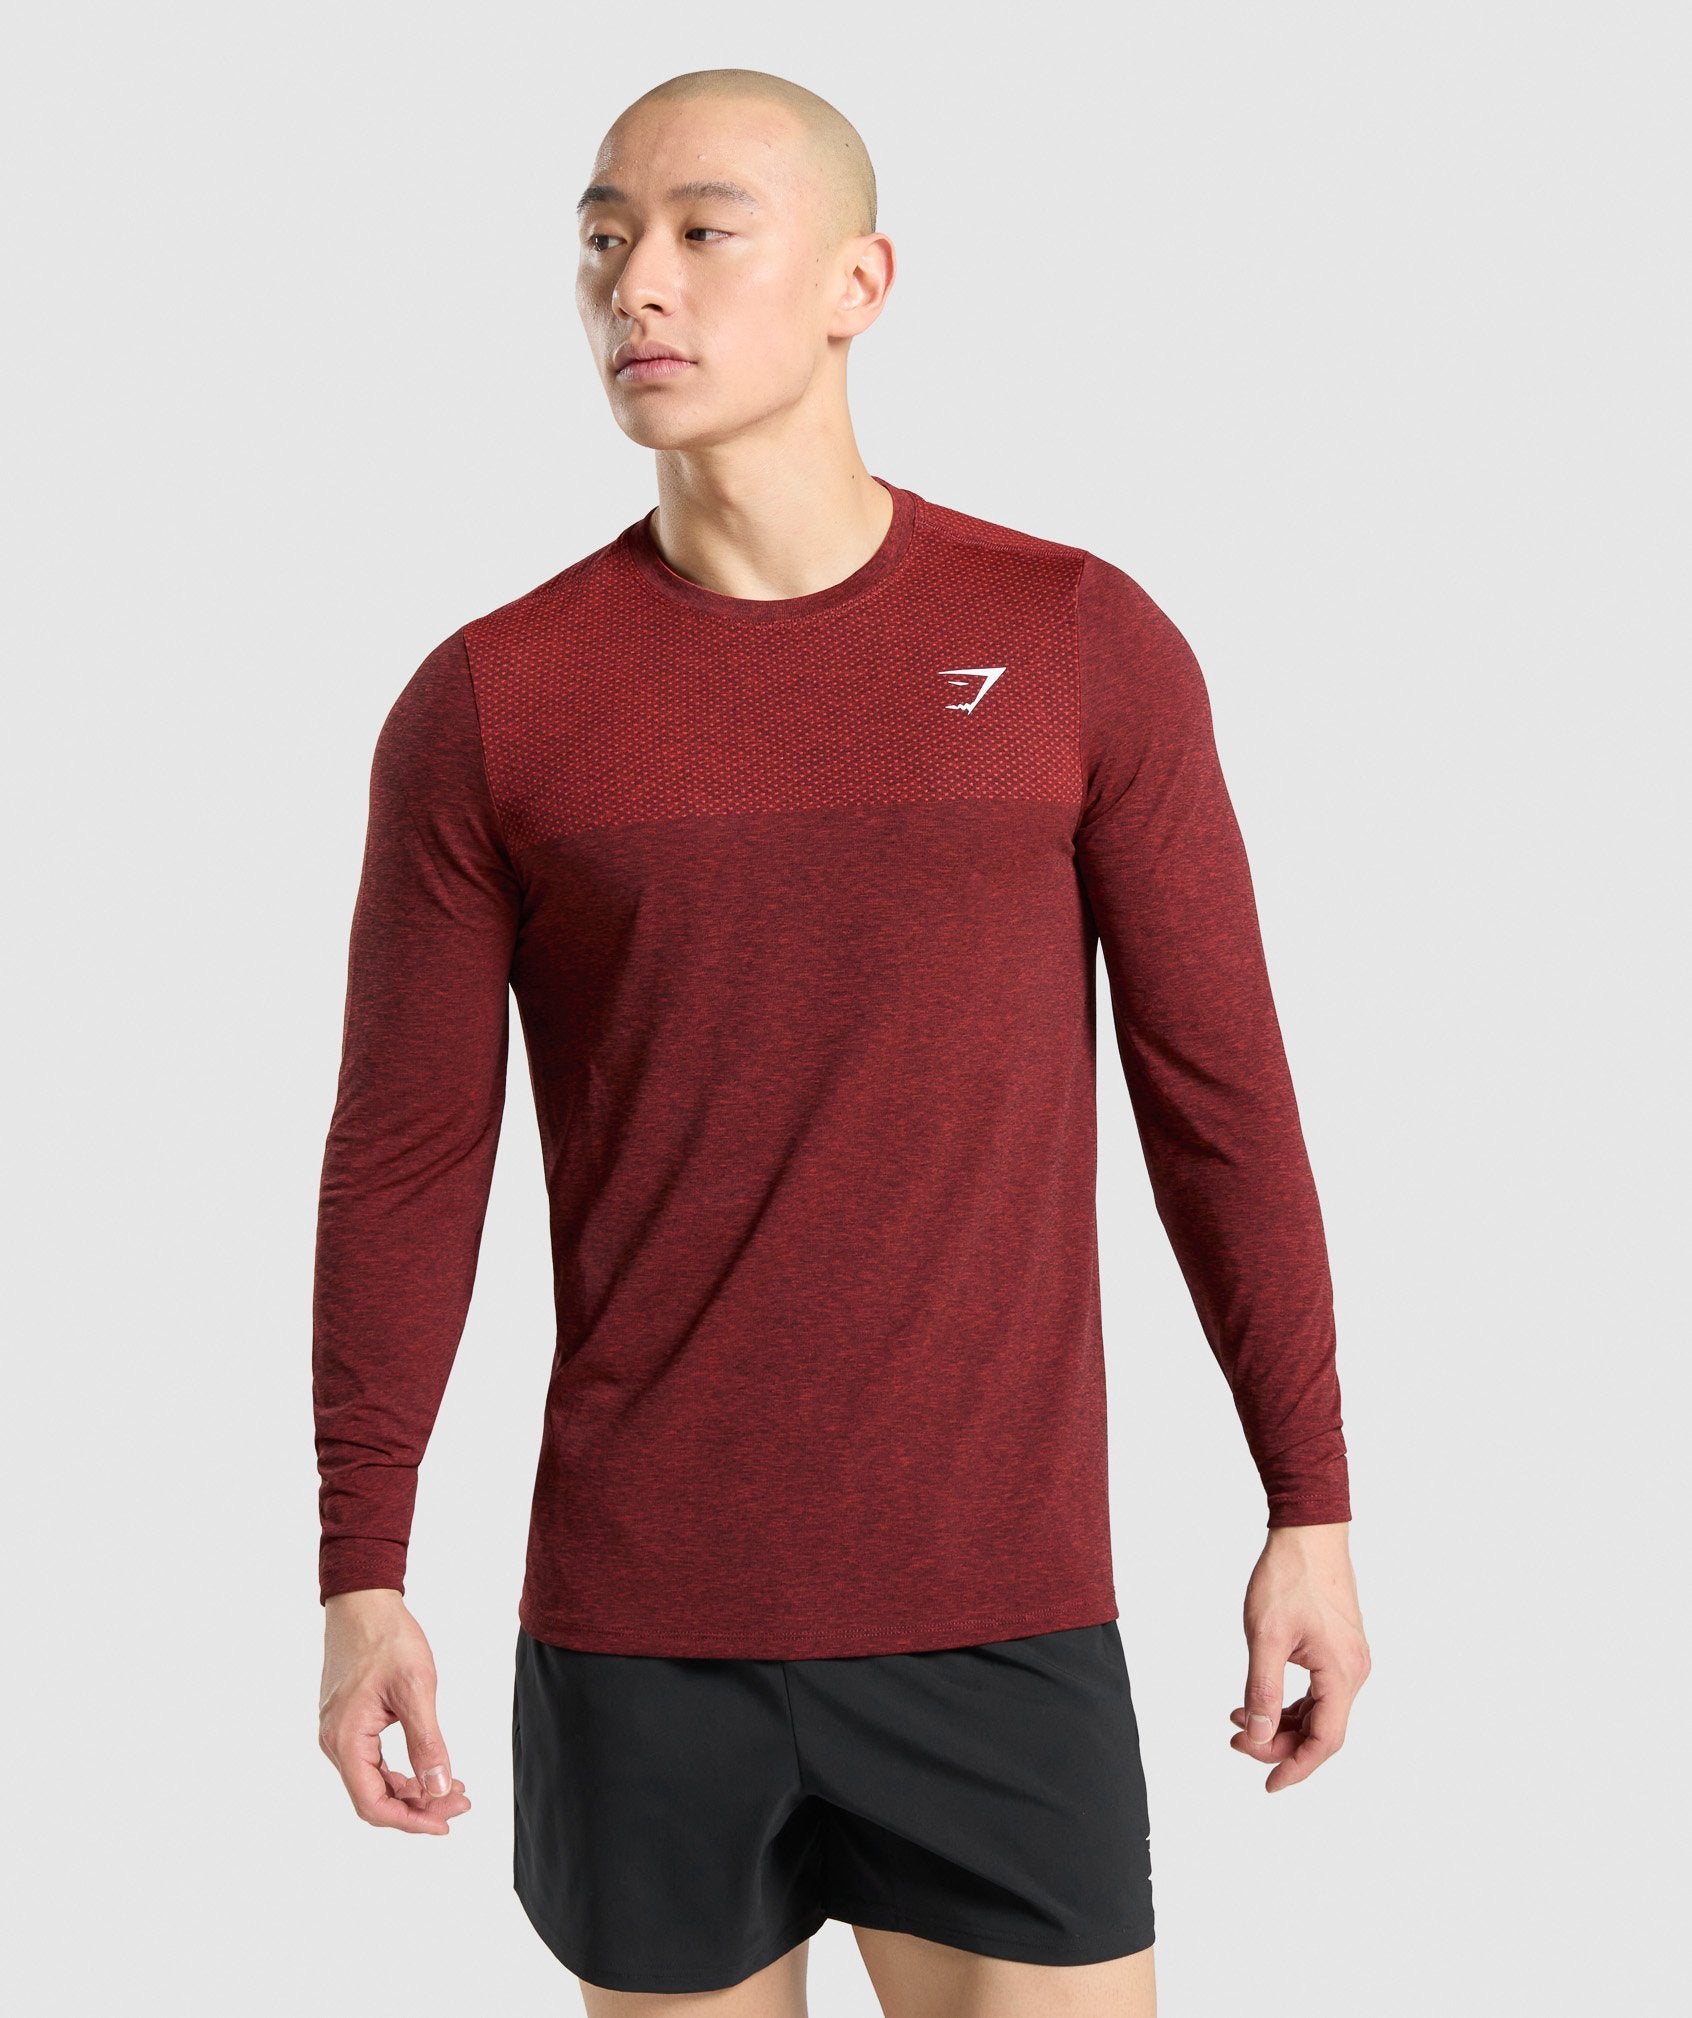 Vital Long Sleeve T-Shirt in Red Marl - view 1